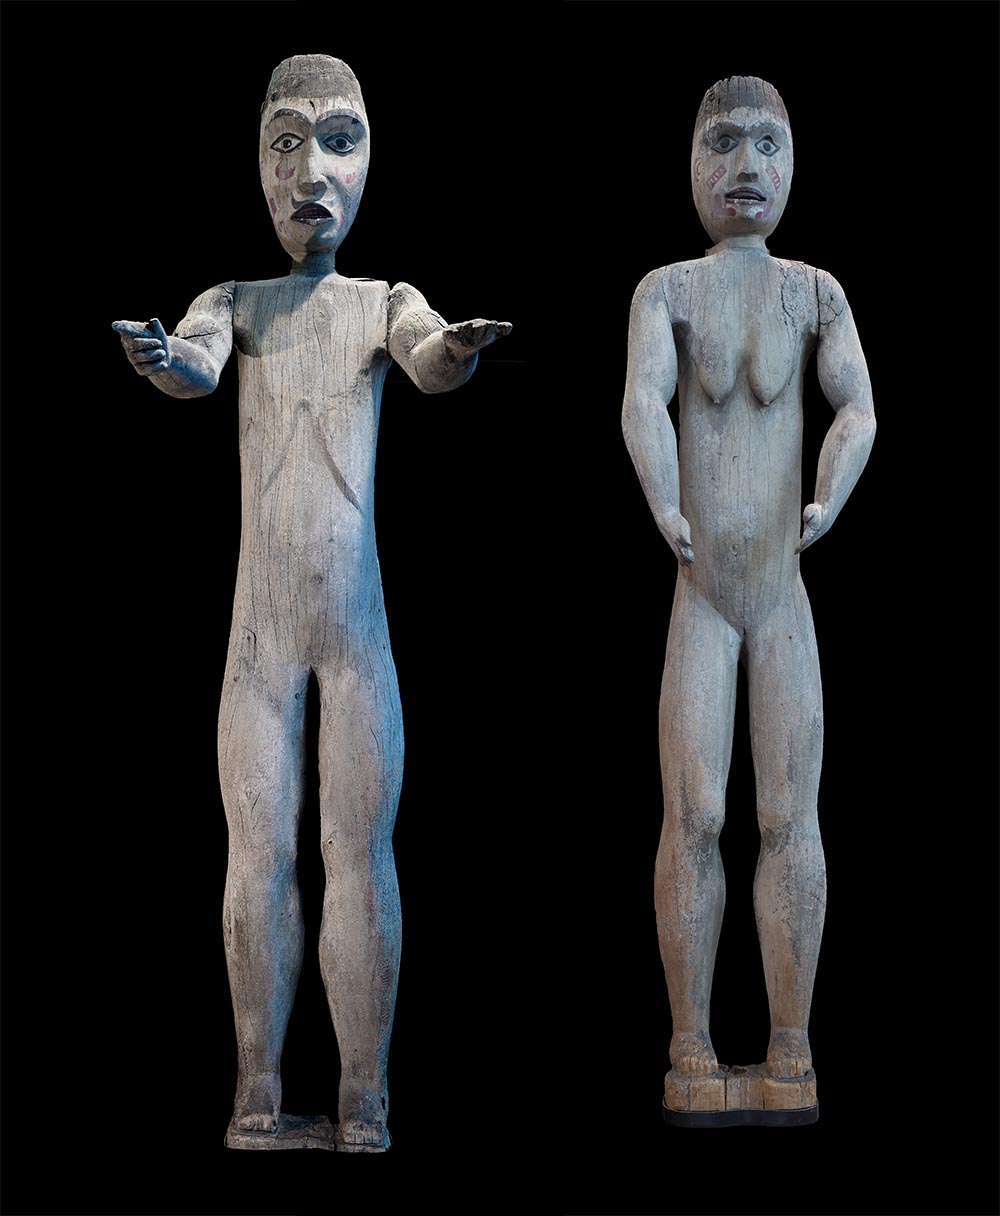 Carved human figures in the museum collection. 